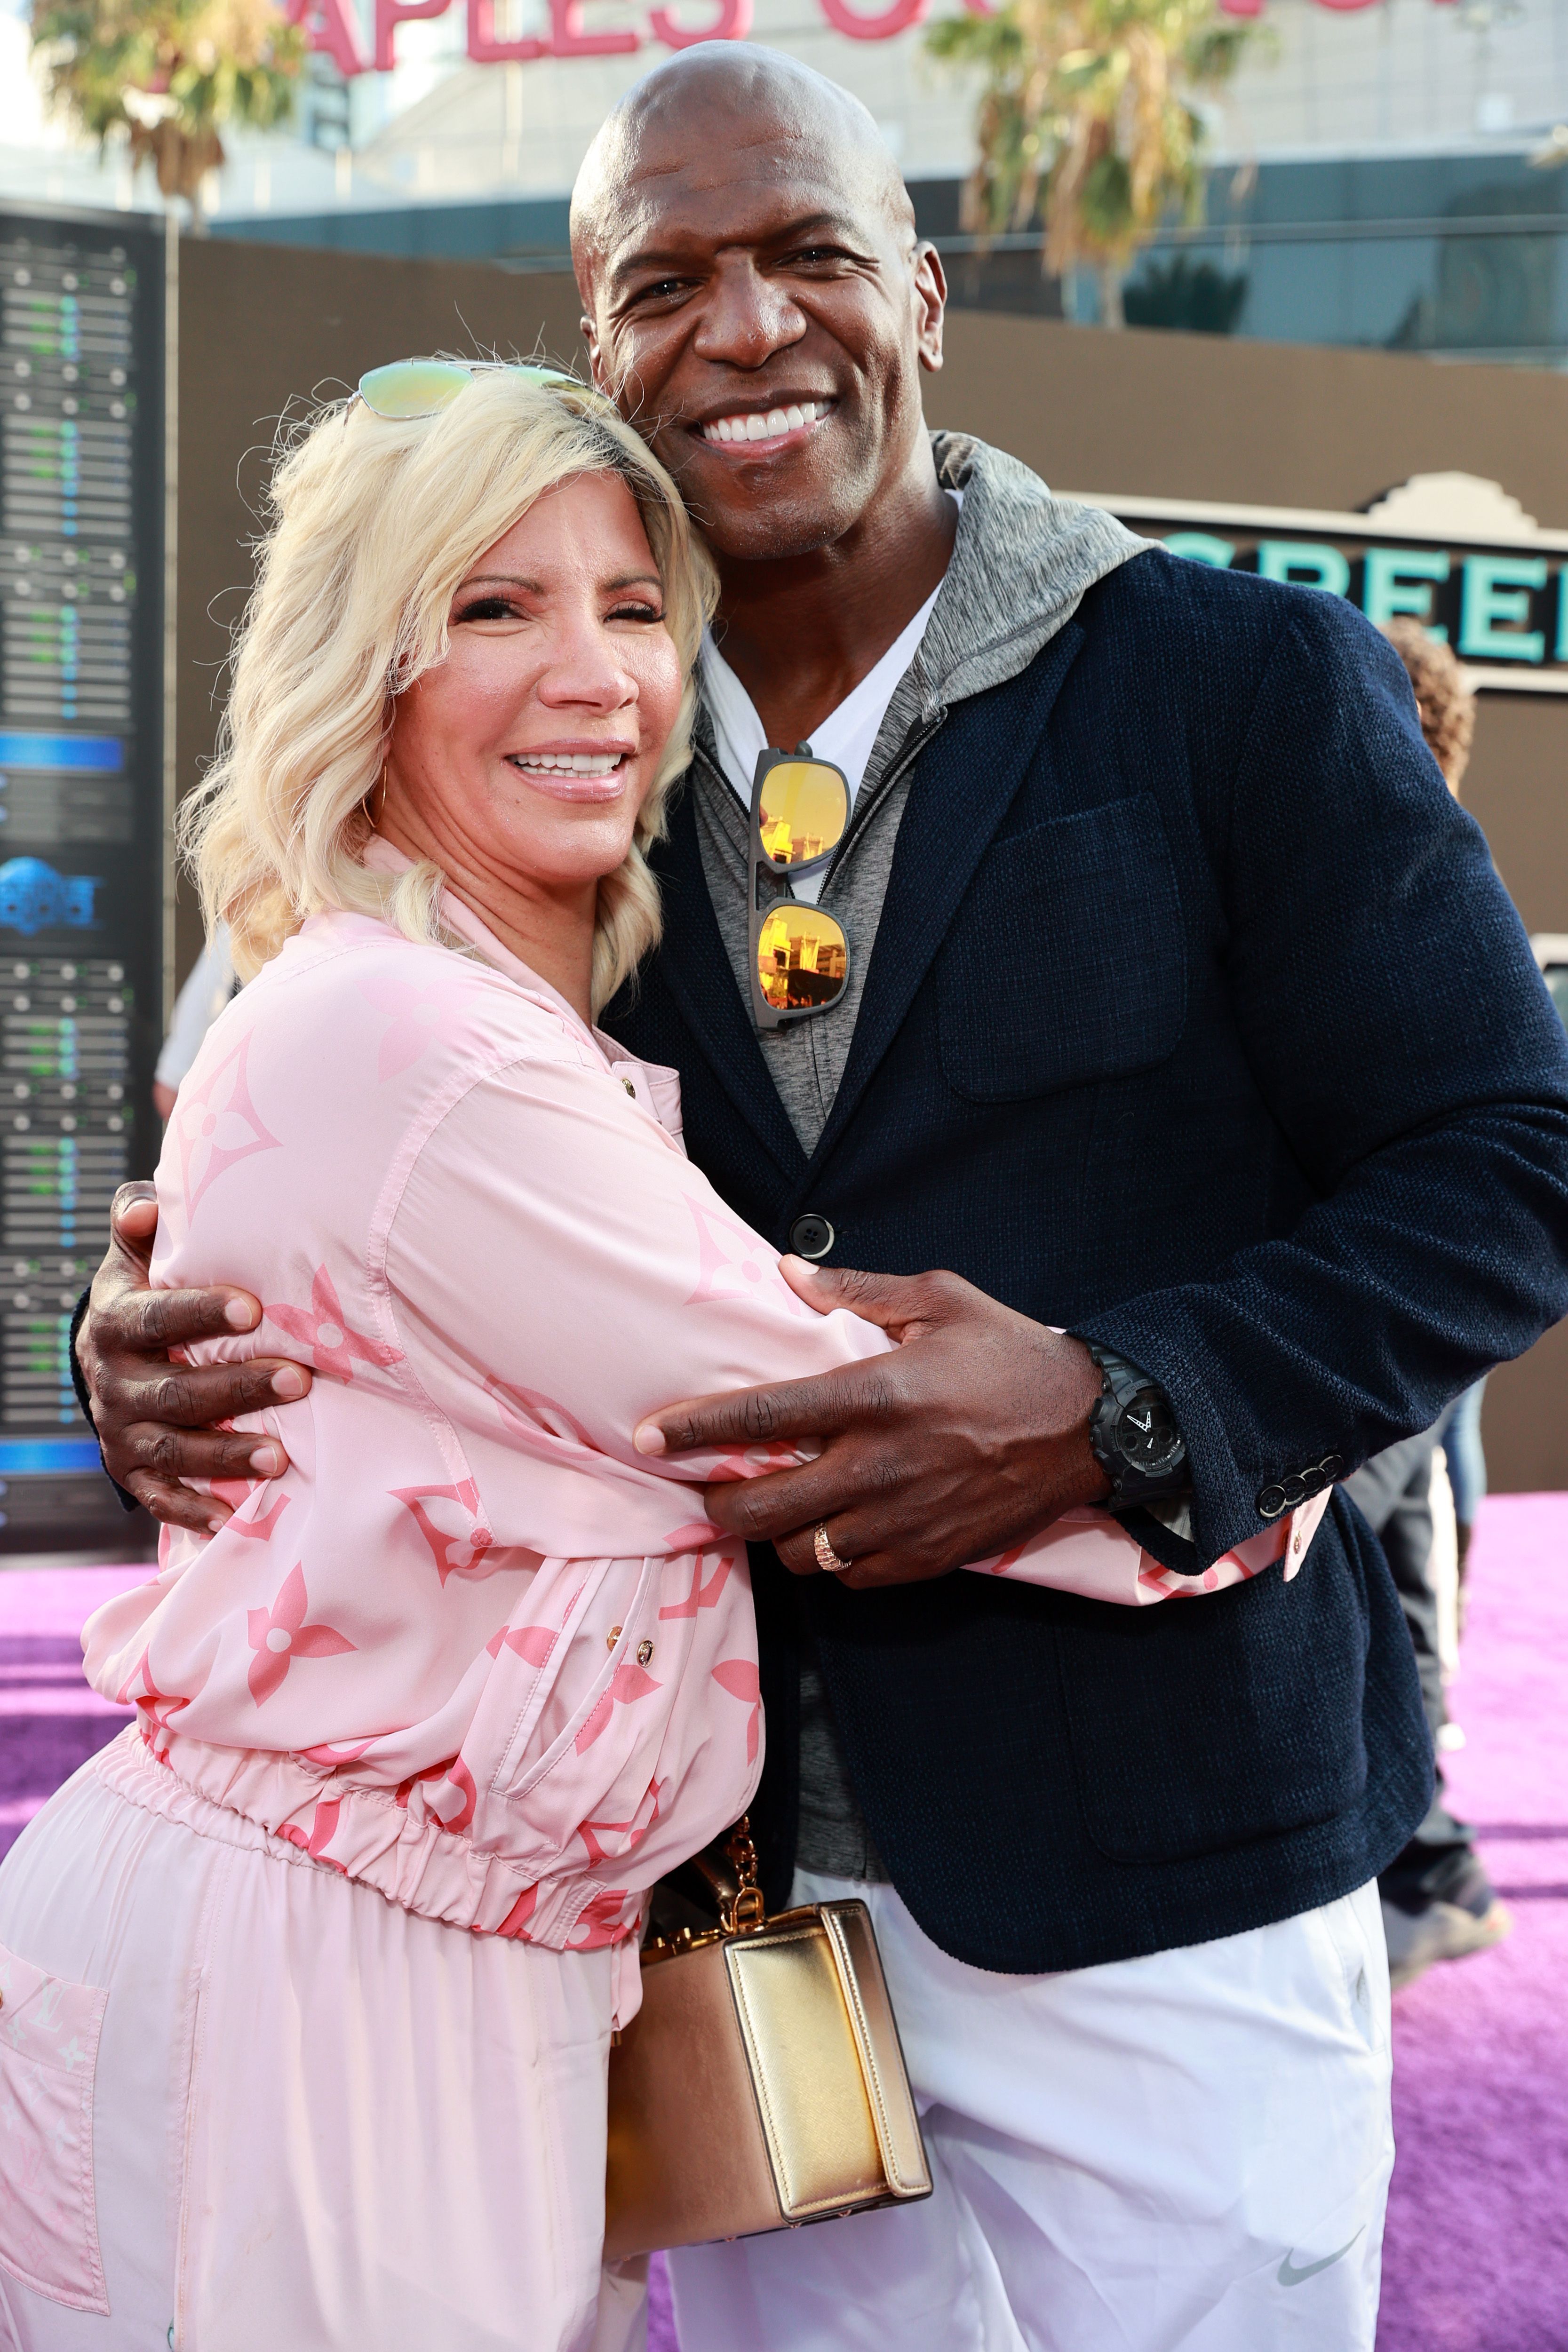 Rebecca King-Crews and Terry Crews attend the premiere of Warner Bros "Space Jam: A New Legacy" at Regal LA Live on July 12, 2021, in Los Angeles, California. | Source: Getty Images